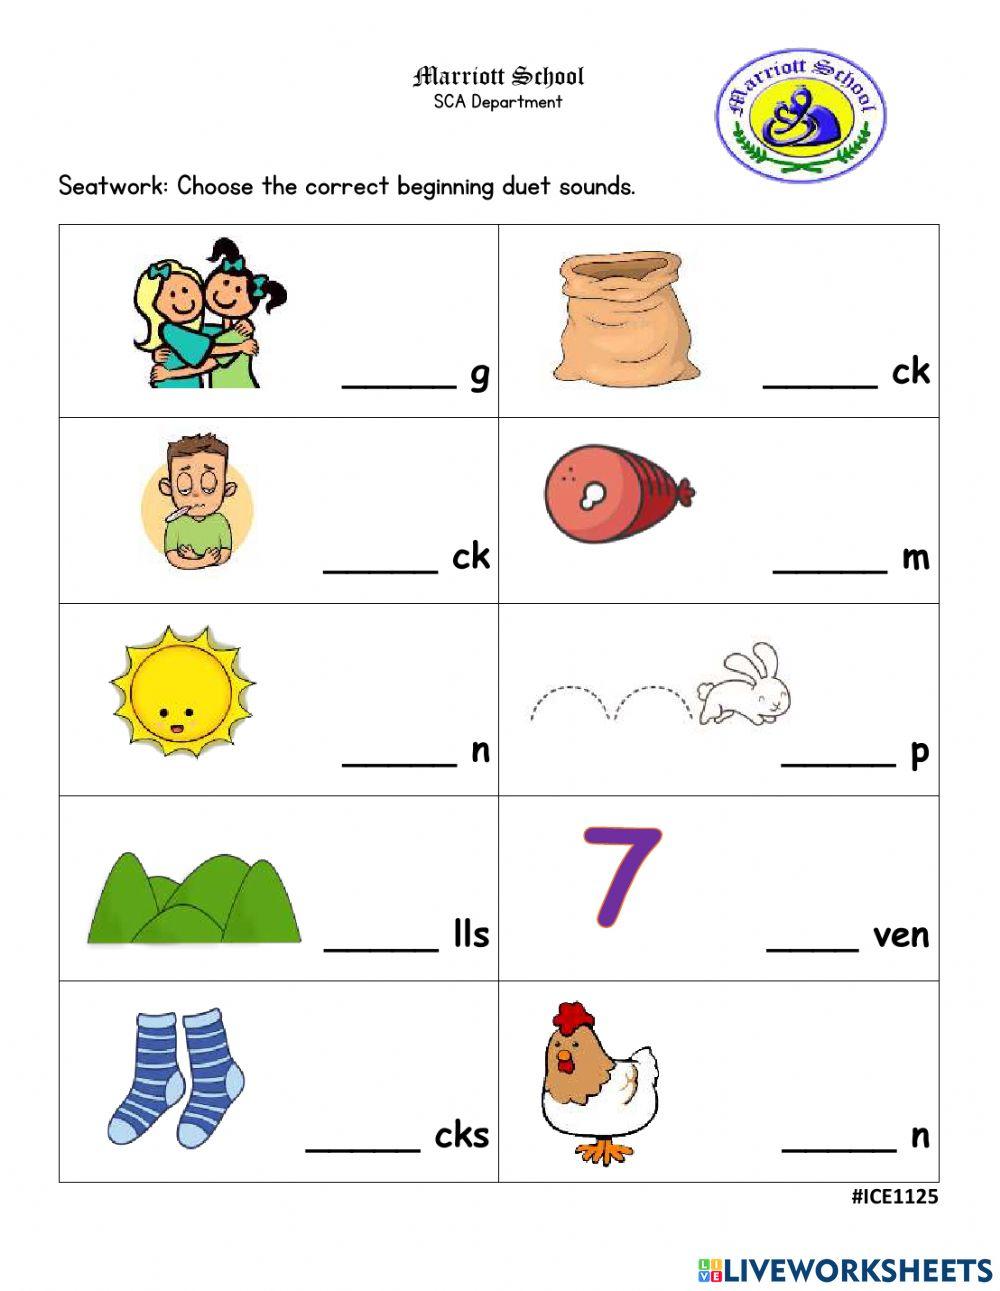 Duet Sounds Hh and Ss interactive worksheet | Live Worksheets